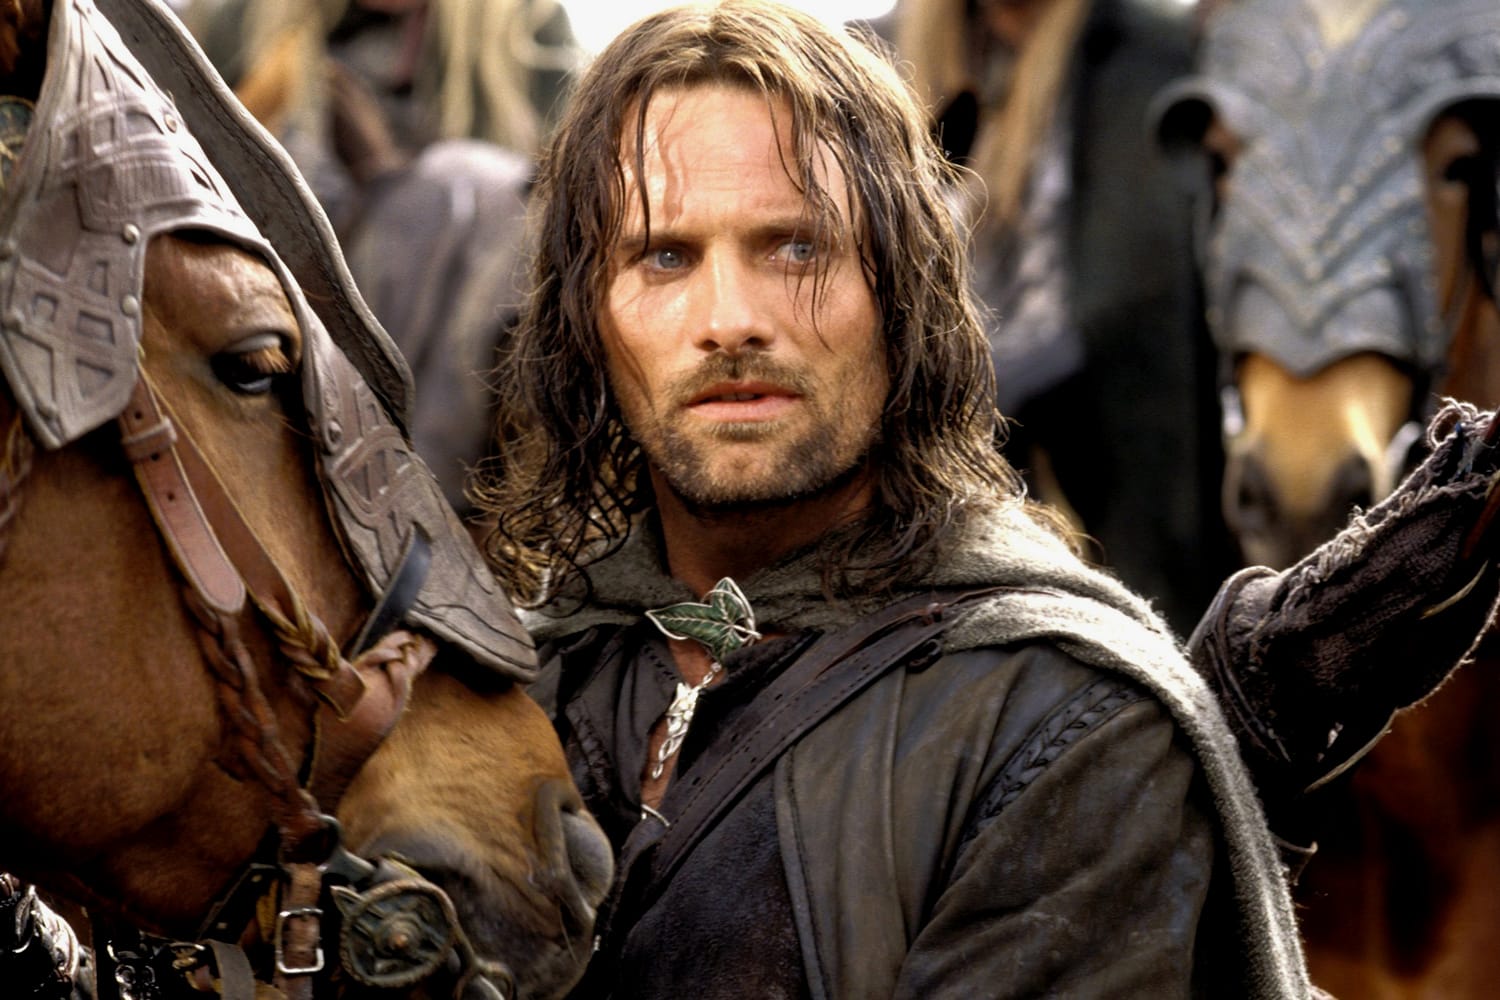 Who Would Win Between Lord of the Rings' Aragorn and Legolas?